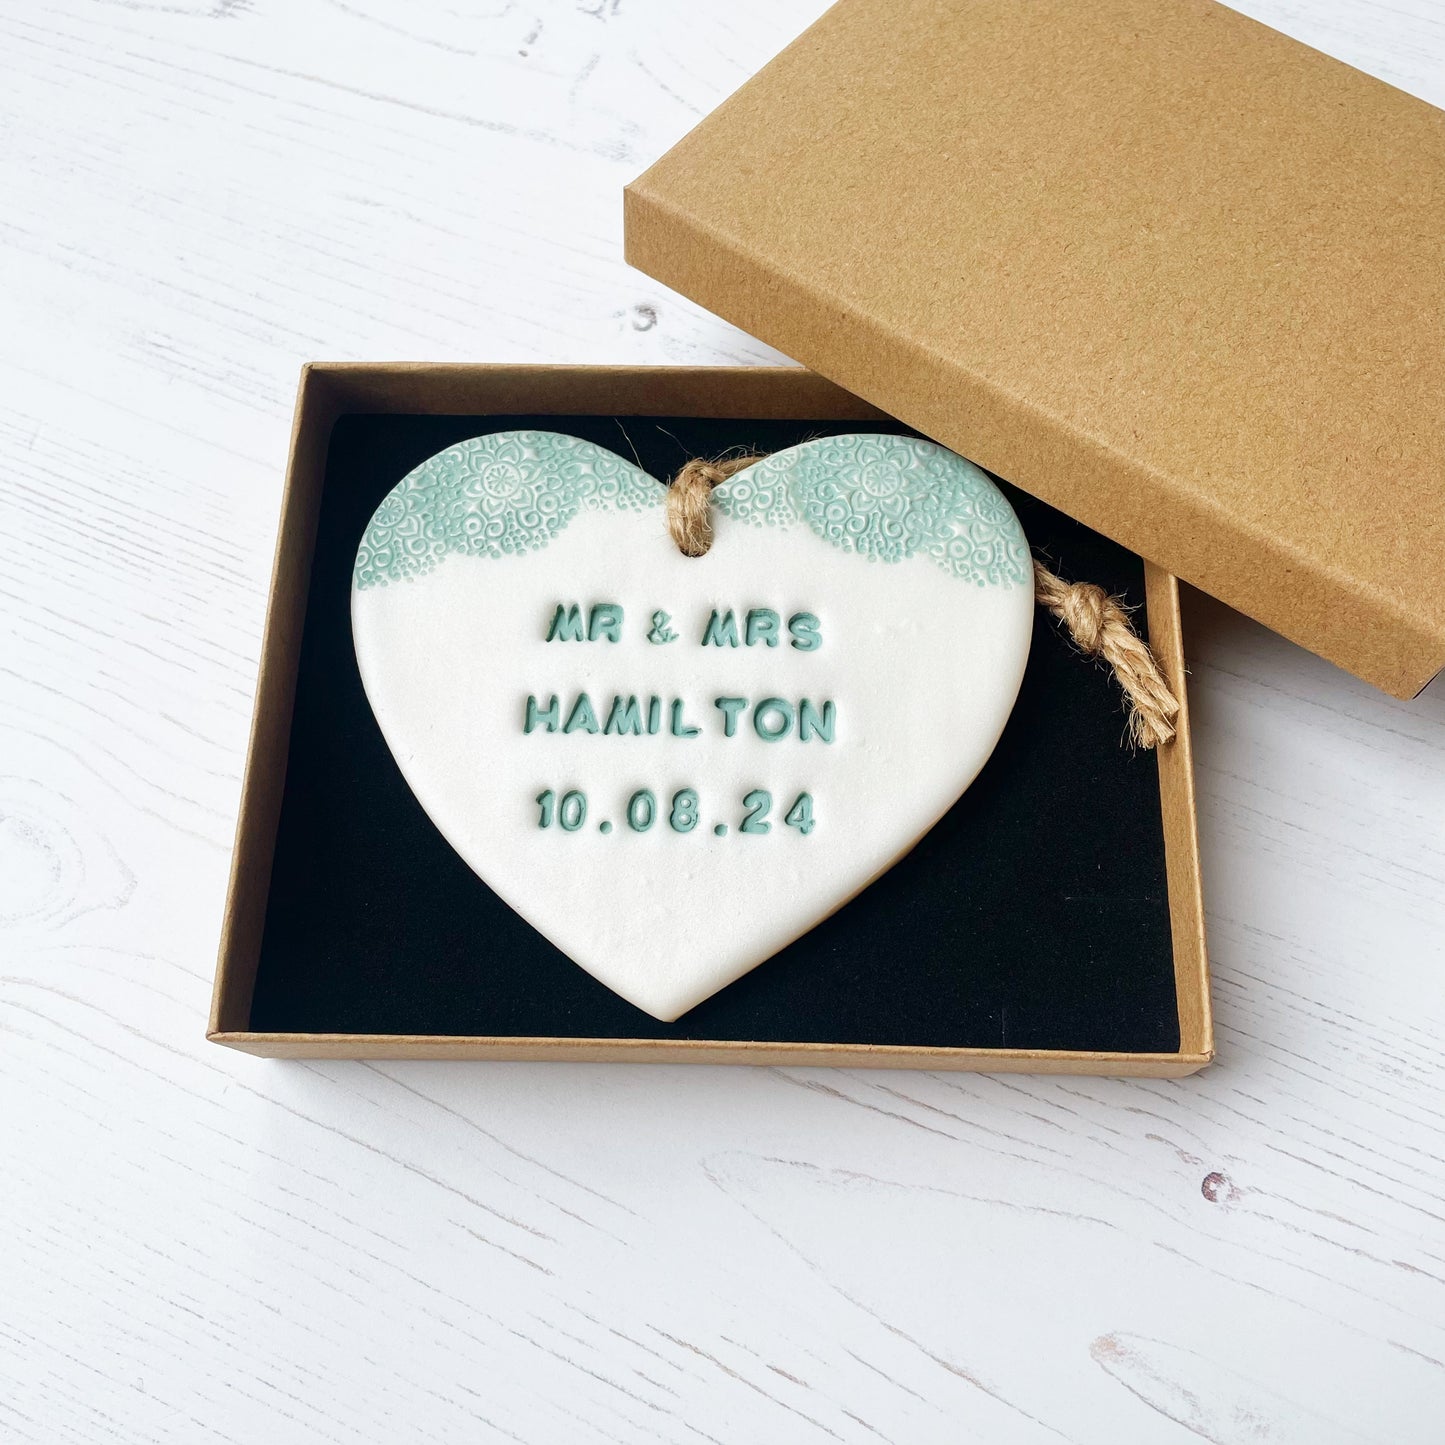 Personalised wedding gift, pearlised white clay hanging heart with a sage green lace edge at the top of the heart, the heart is personalised with MR & MRS HAMILTON 10.08.24